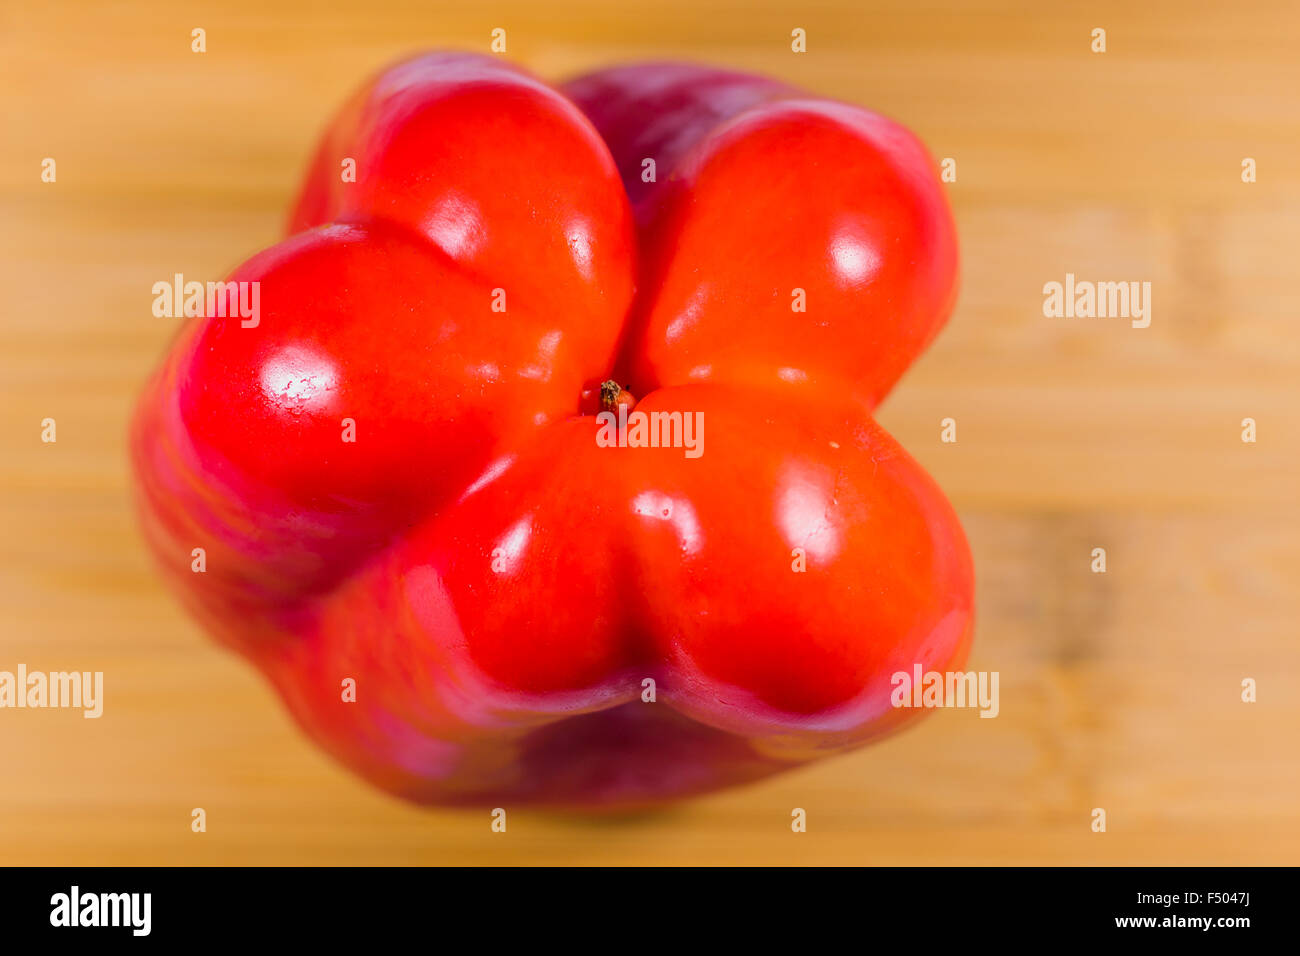 Red bell pepper on wooden table Stock Photo